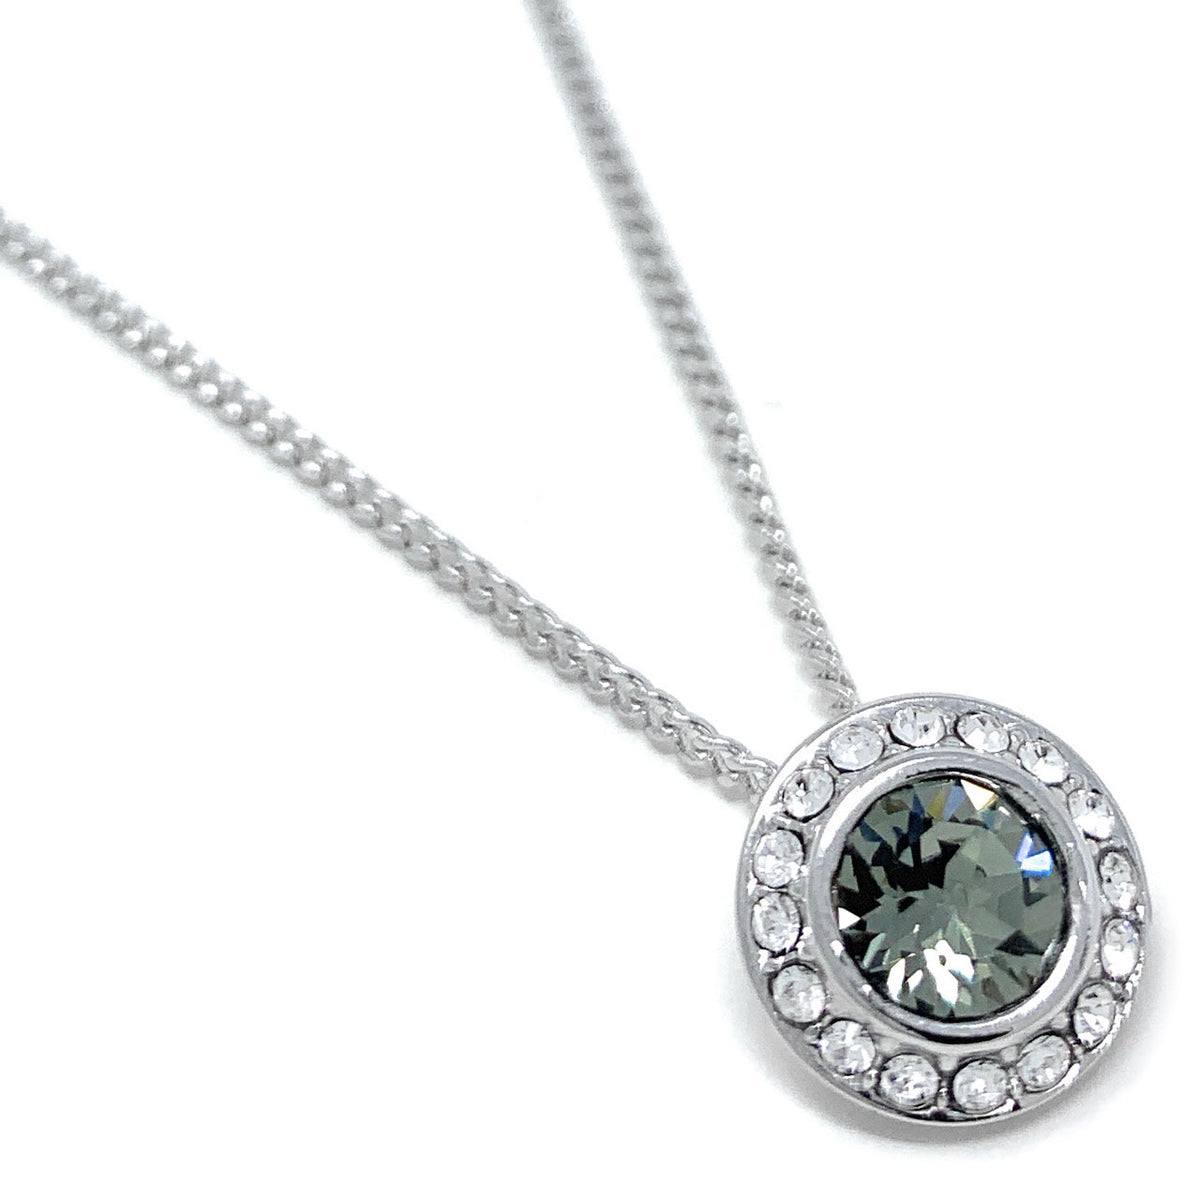 Halo Pave Pendant Necklace with Black Diamond Round Crystals from Swarovski Silver Toned Rhodium Plated - Ed Heart